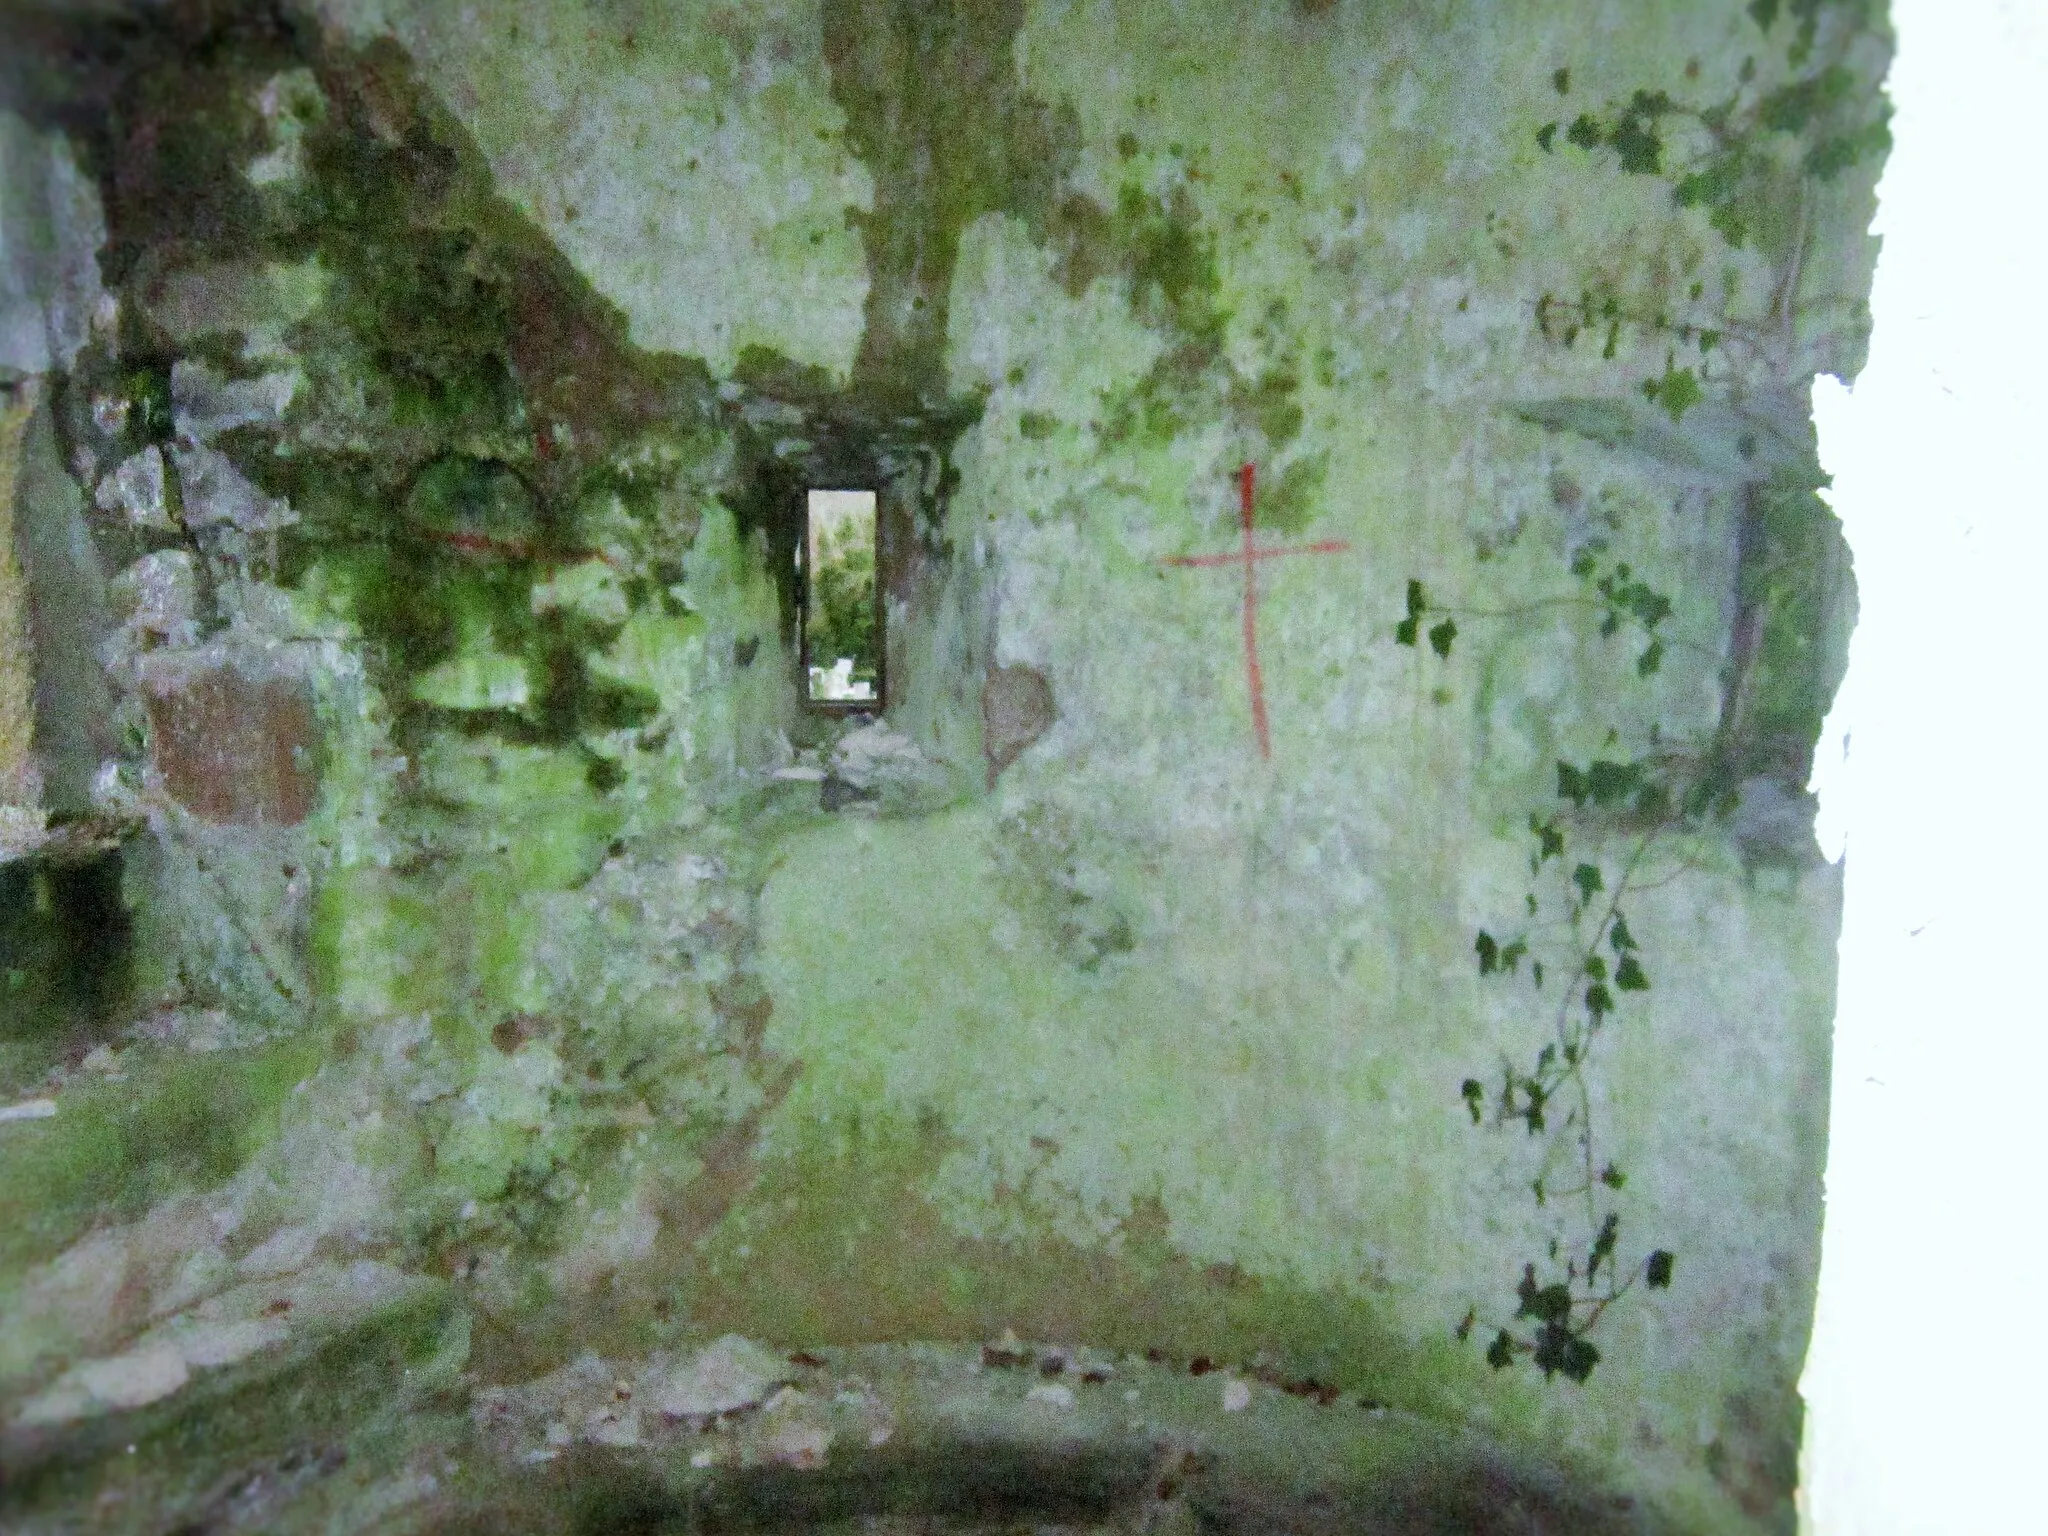 Photo showing: Inside the old watchtower at Cruagh Cemetery. Photograph was taken by putting tripod through the high window